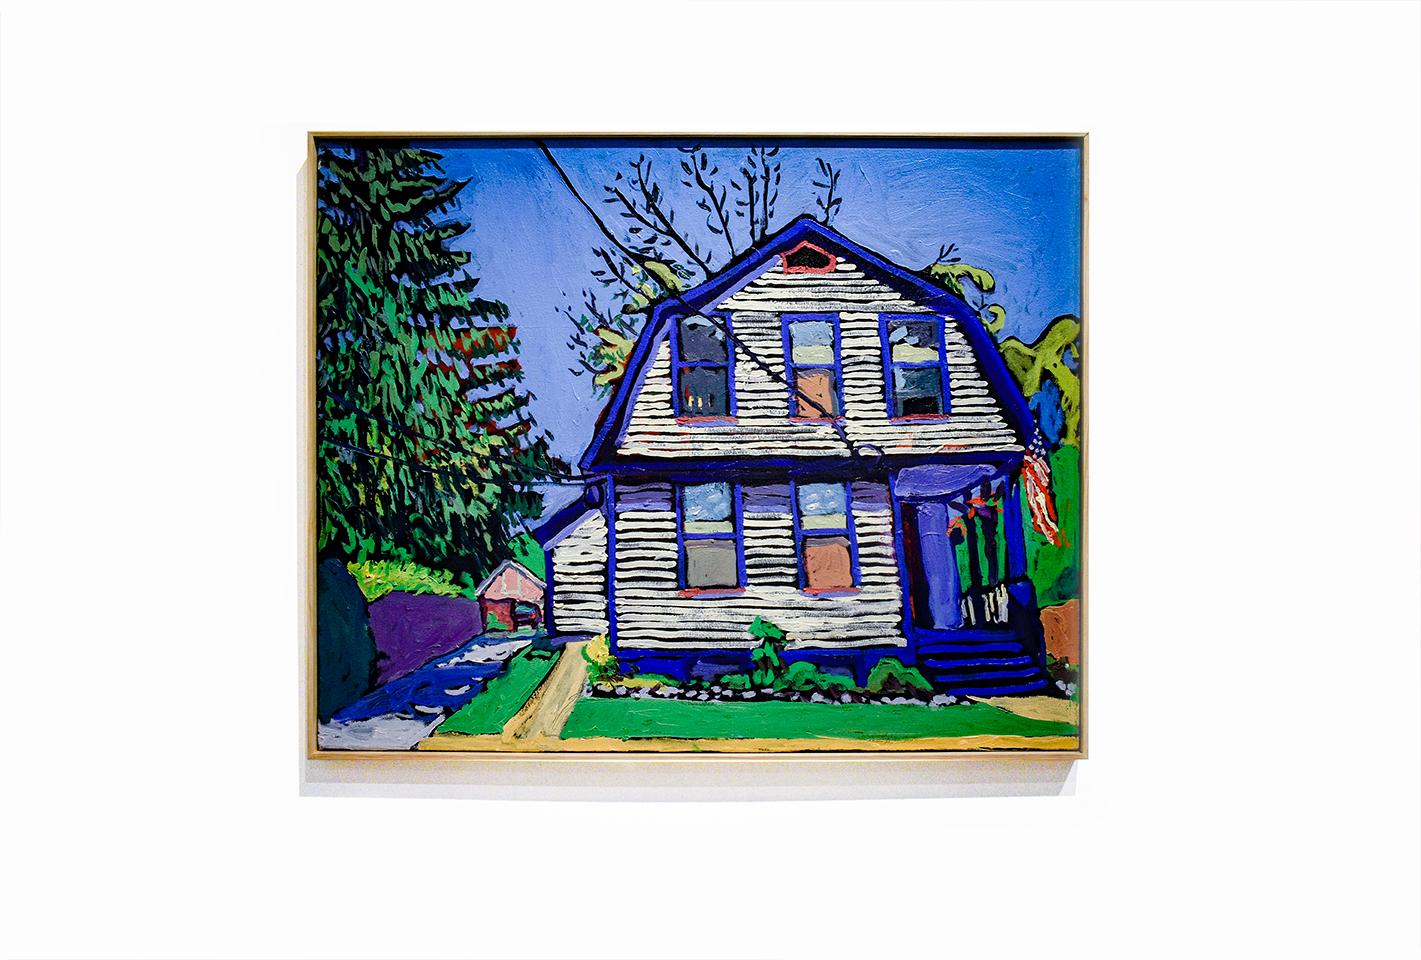 112 2nd St (Contemporary Brightly Colored Oil, White House & Blue Trim) - Painting by Dan Rupe